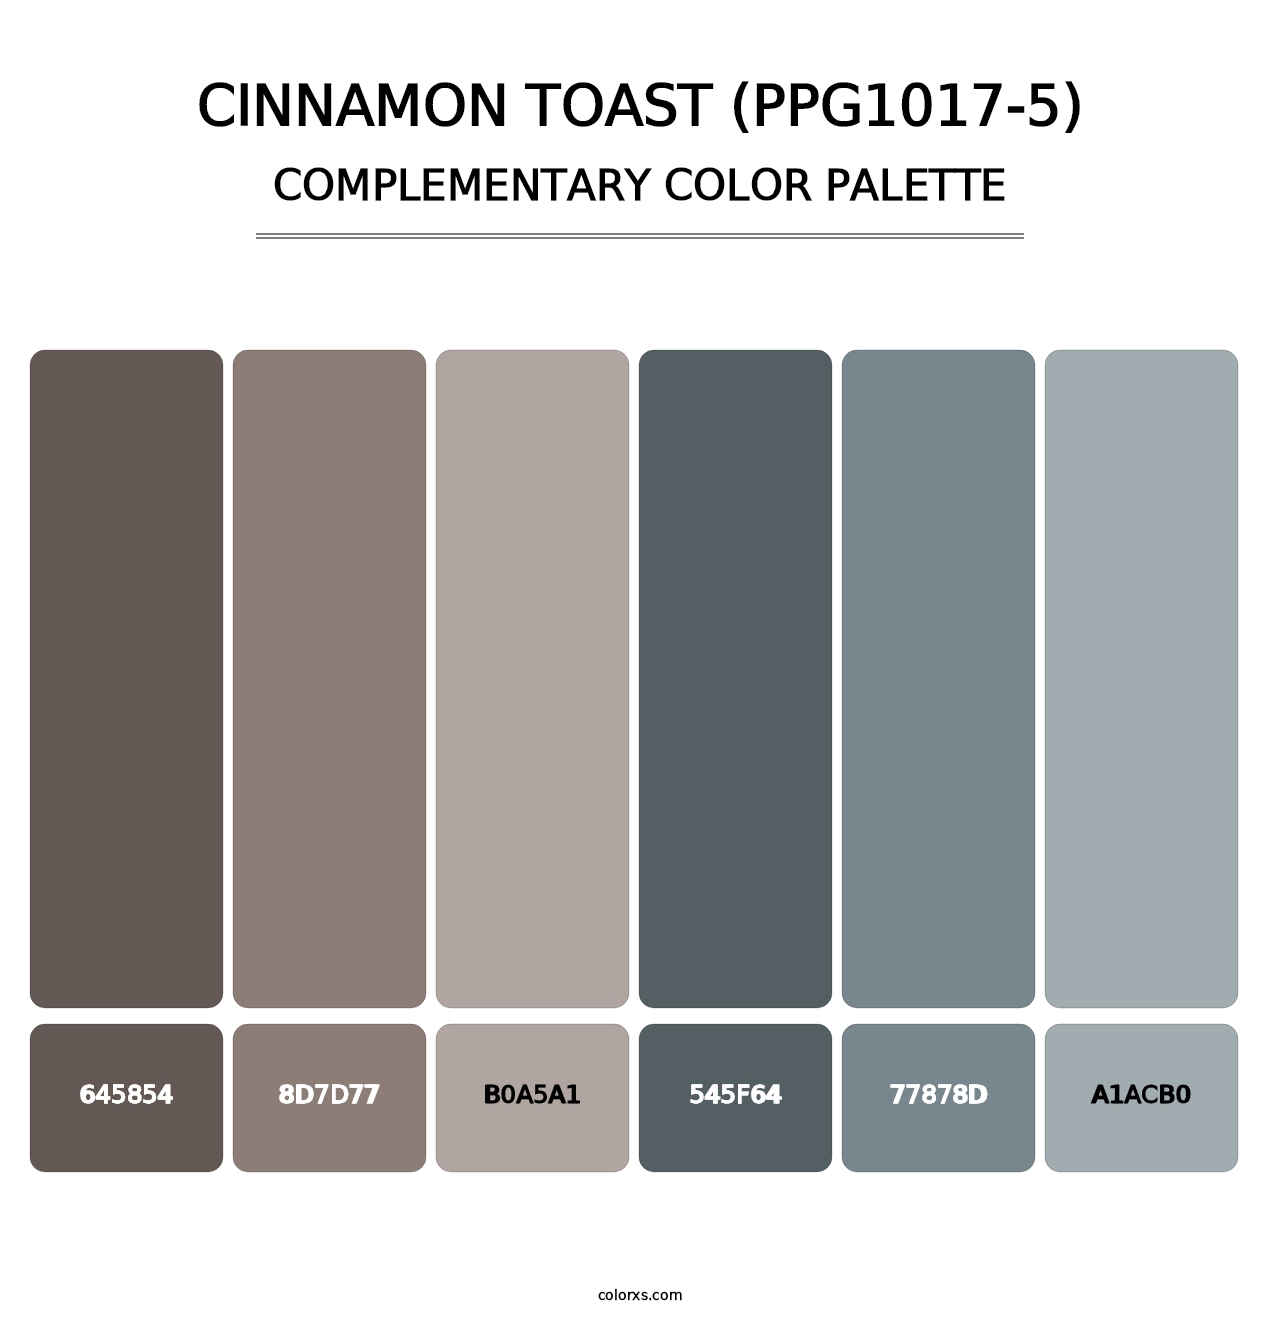 Cinnamon Toast (PPG1017-5) - Complementary Color Palette